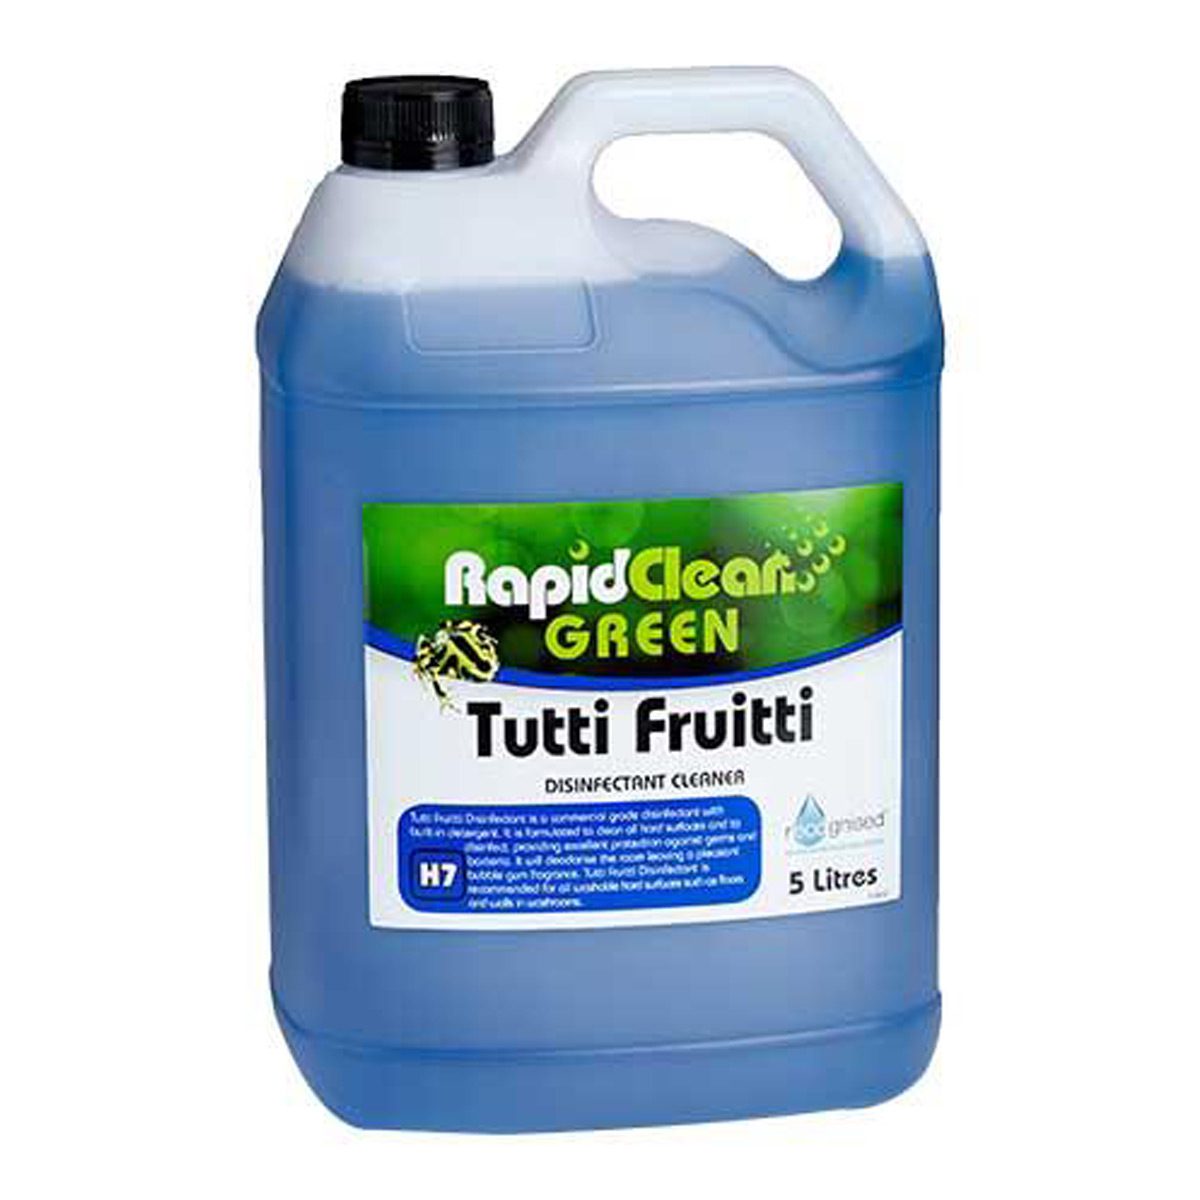 cleaning-products-disinfectants-and-sanitisers-rapidclean-green-tutti-fruitti-disinfectant-cleaner-5L-litre-commercial-grade-disinfectant-with-built-in-detergent-js-distributors-RAP140420SKU